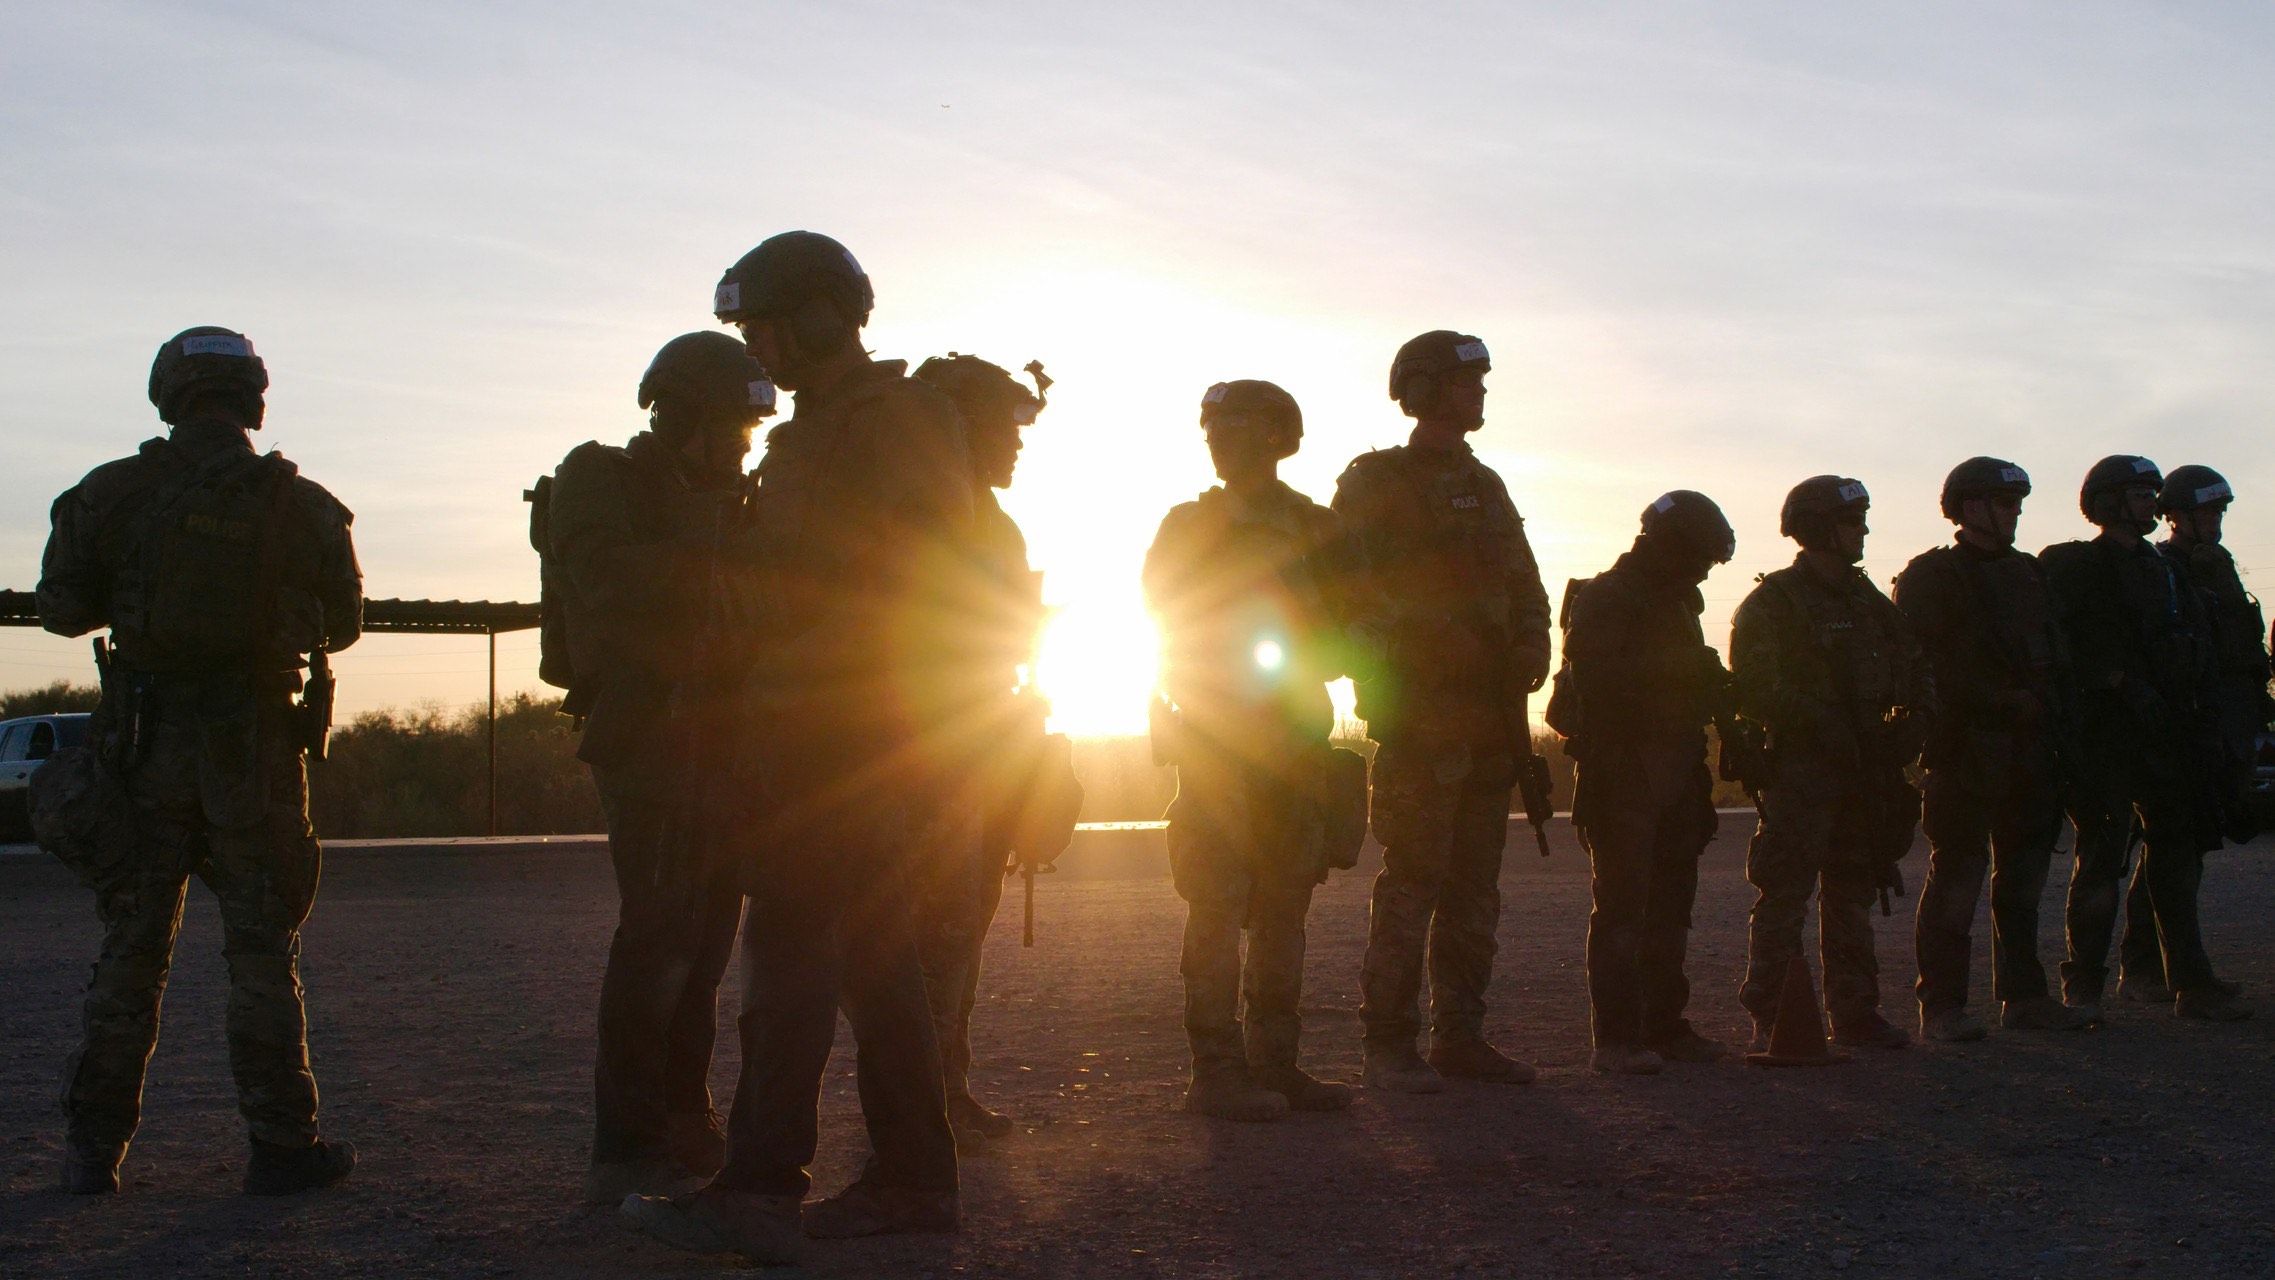 A tactical team, with full gear on in the sunrise on the range for some training